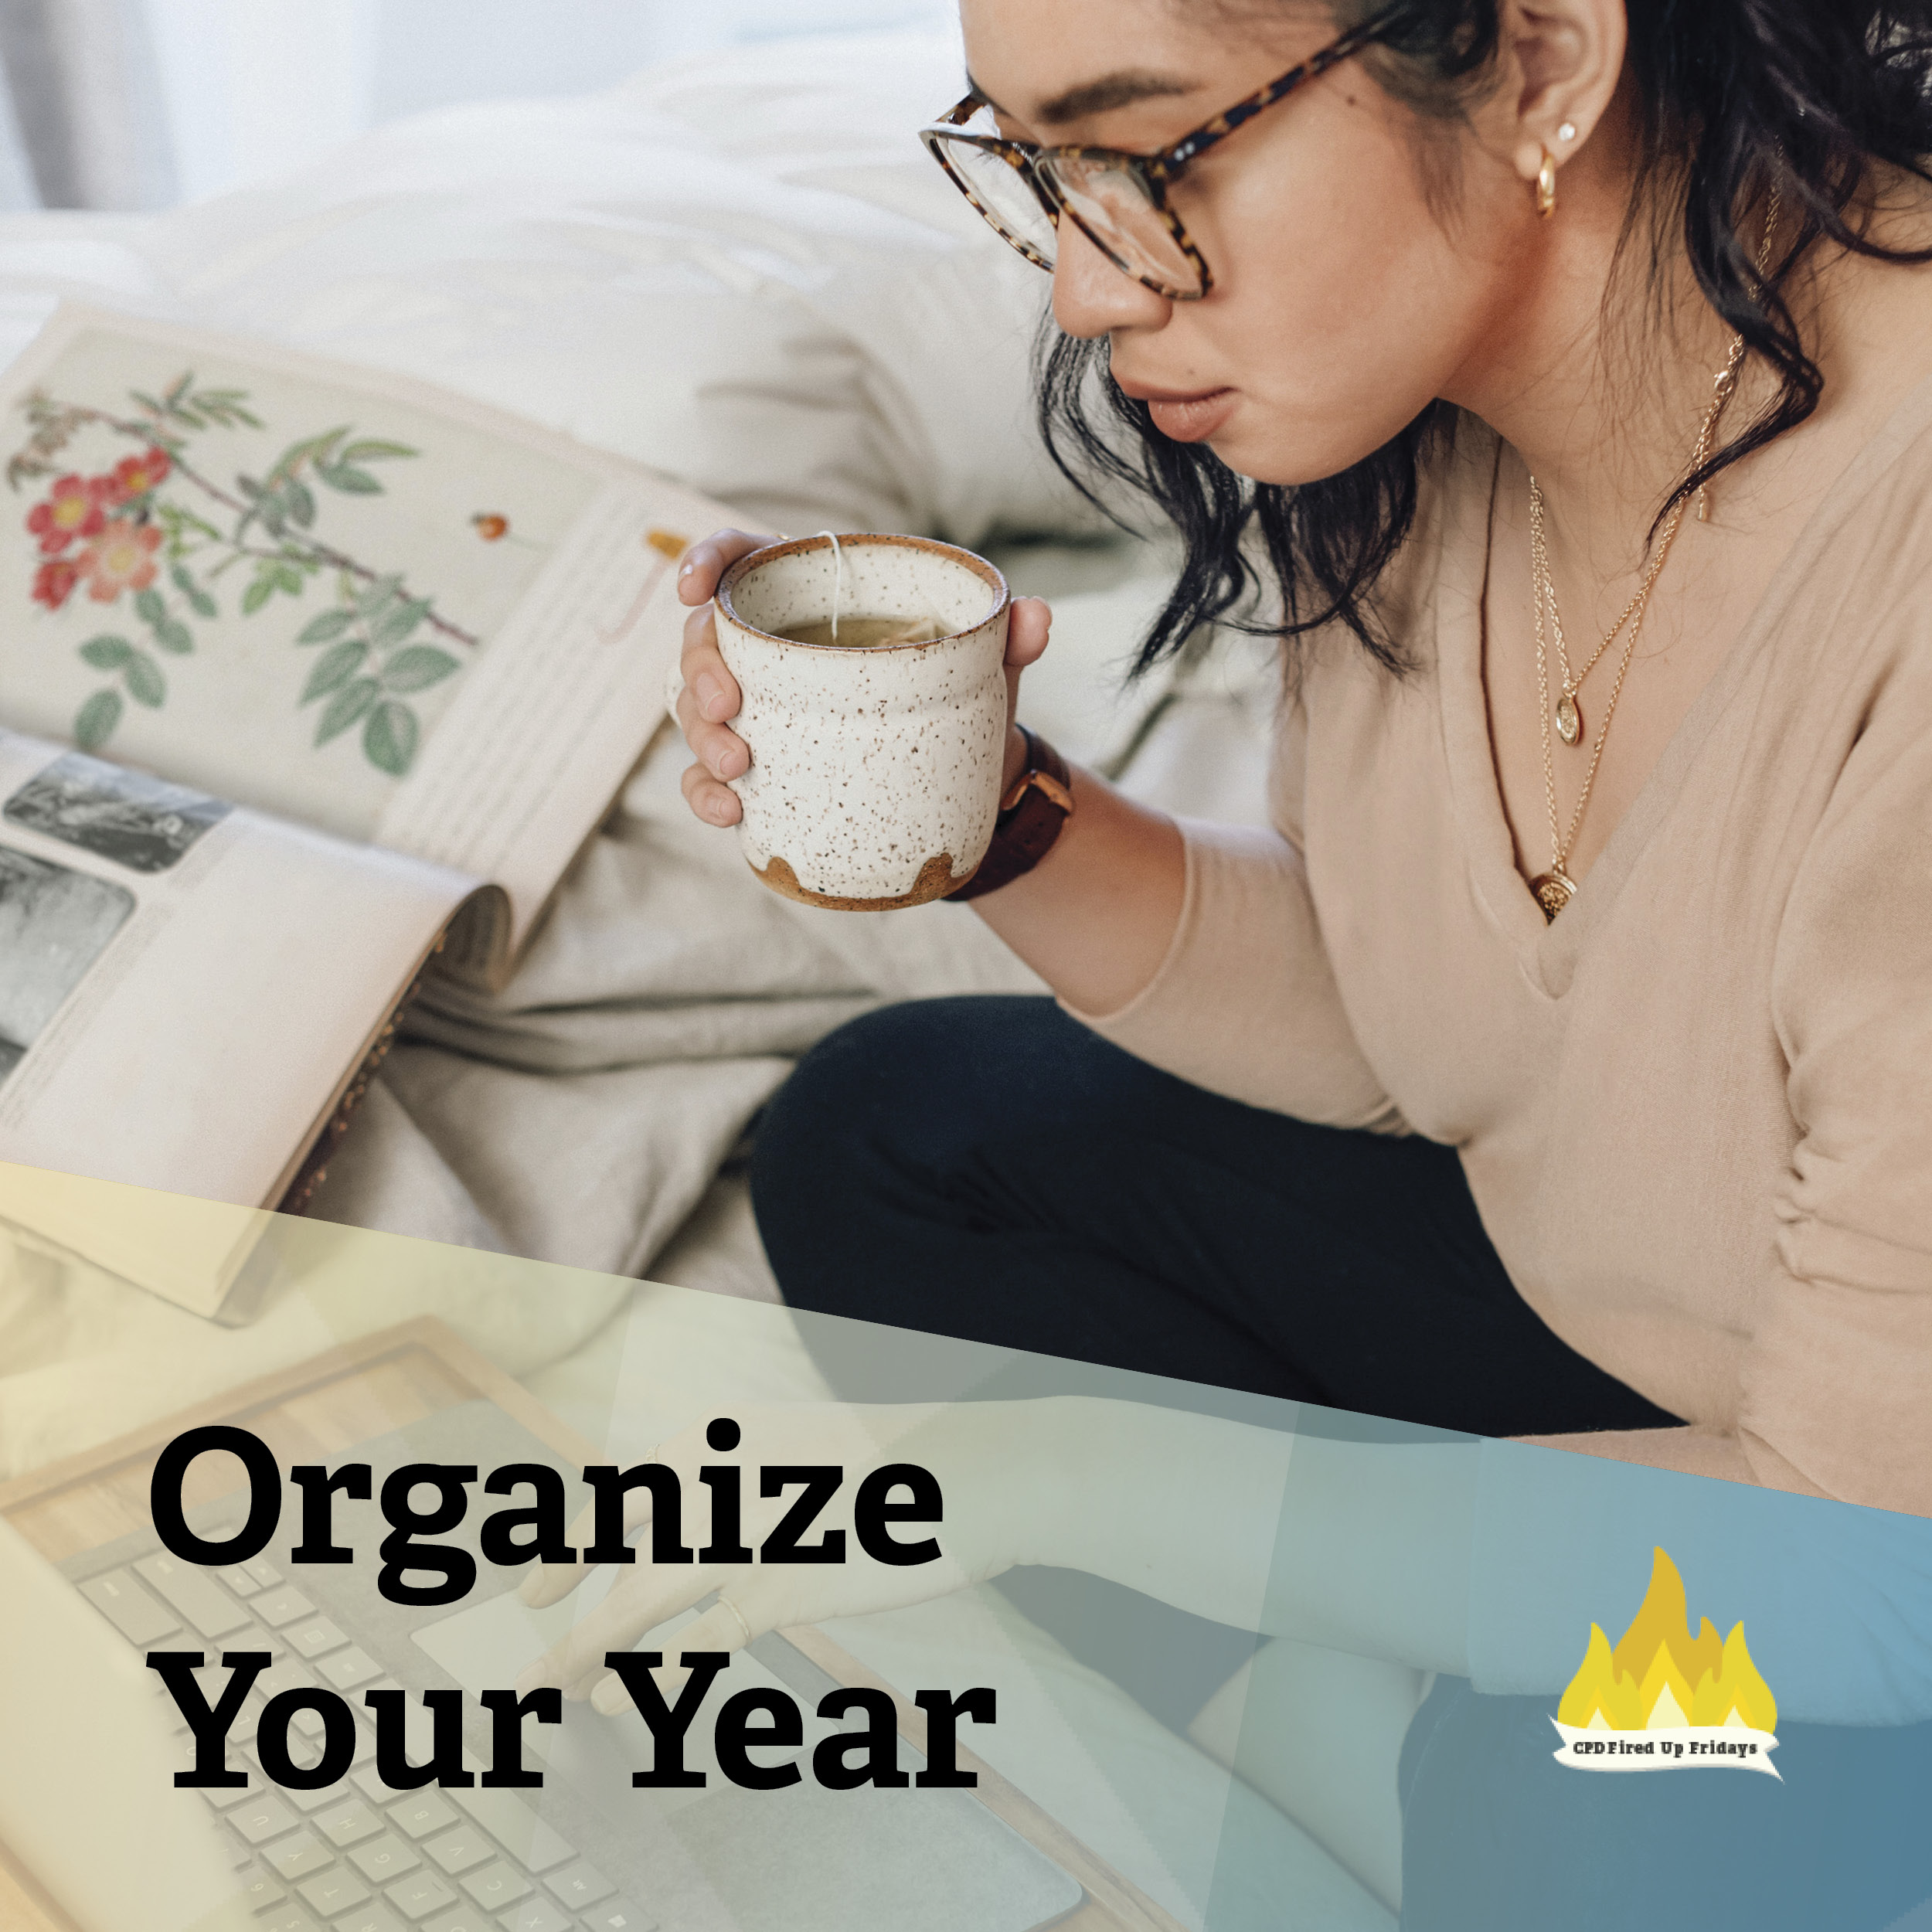 A young woman in glasses holds a cup of coffee and leans over her laptop. On the bed next to her is an open book. Underneath, the text reads: 'Organize Your Year.'